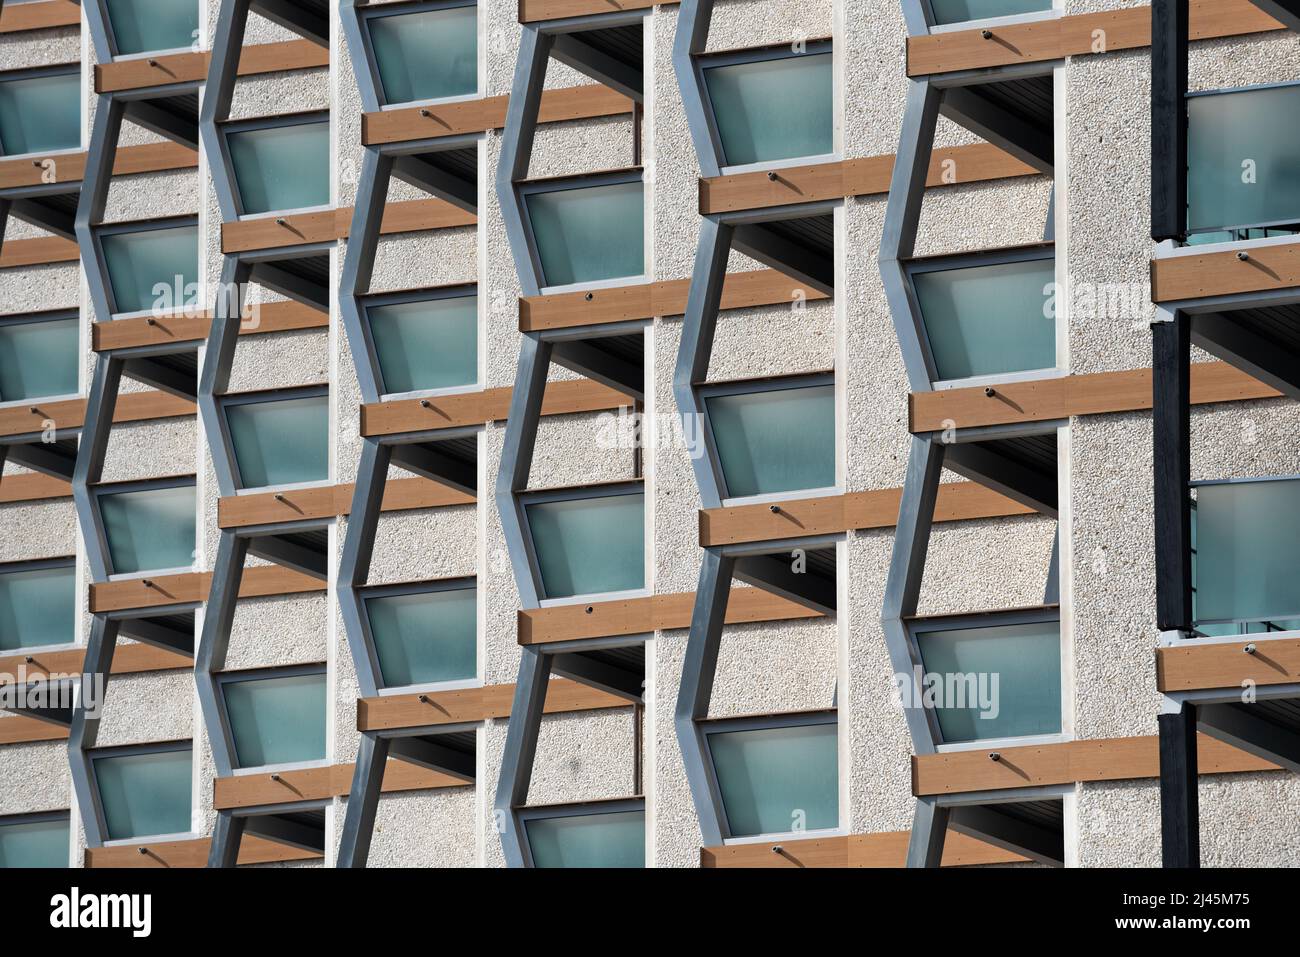 Architectural close-up of building facade of shingle coating with windows and balconies supported by metal beams in symmetric patterns in Chamonix Stock Photo